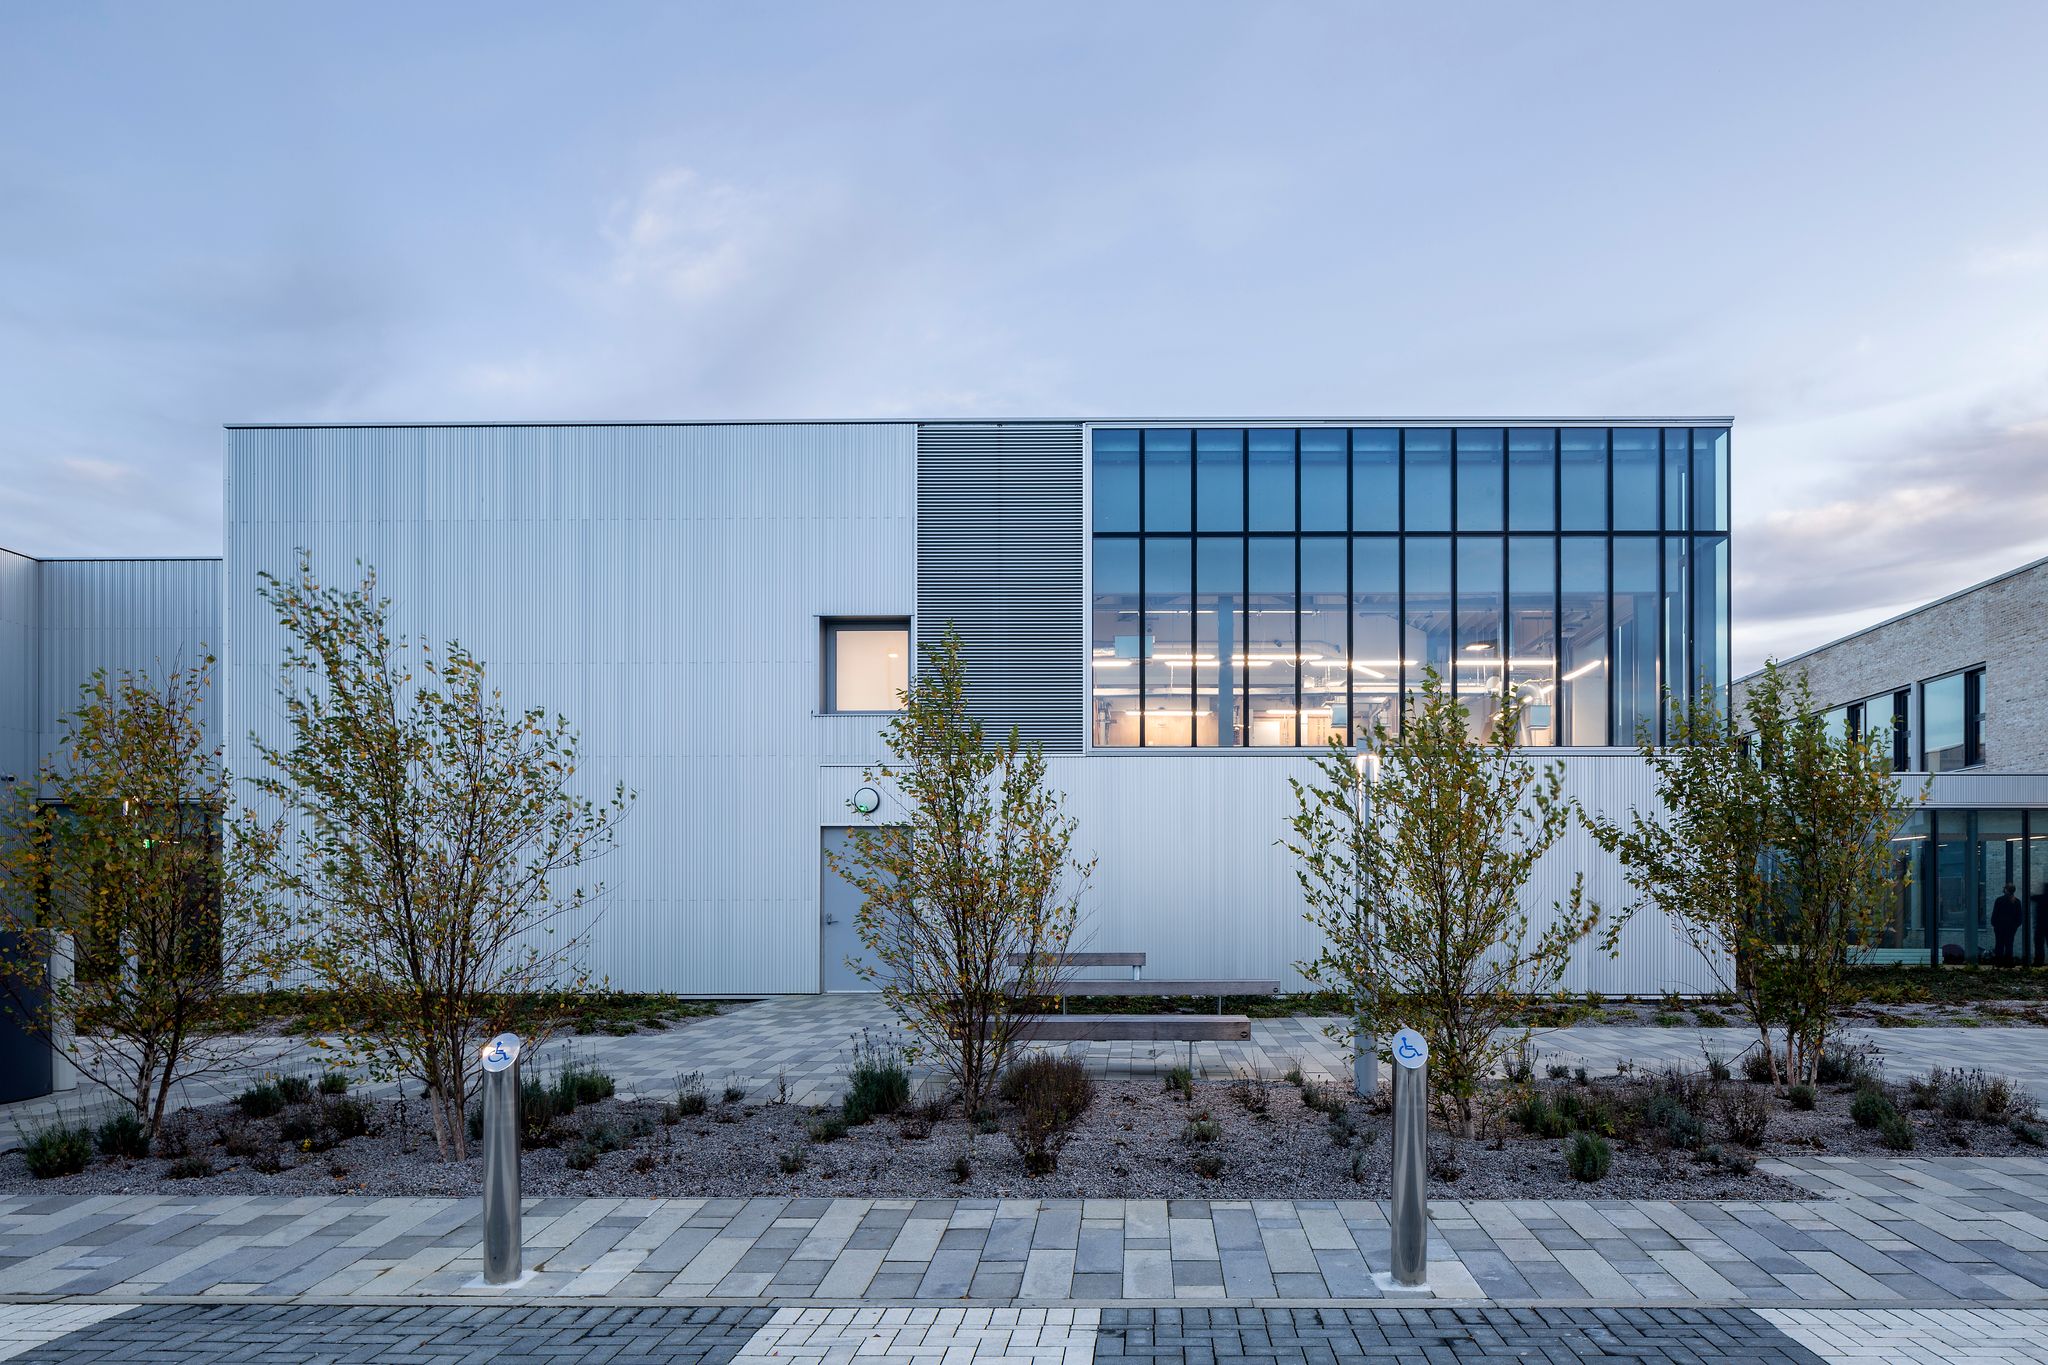 Reiach and Hall Architects' Forth Valley College project makes Stirling Prize shortlist